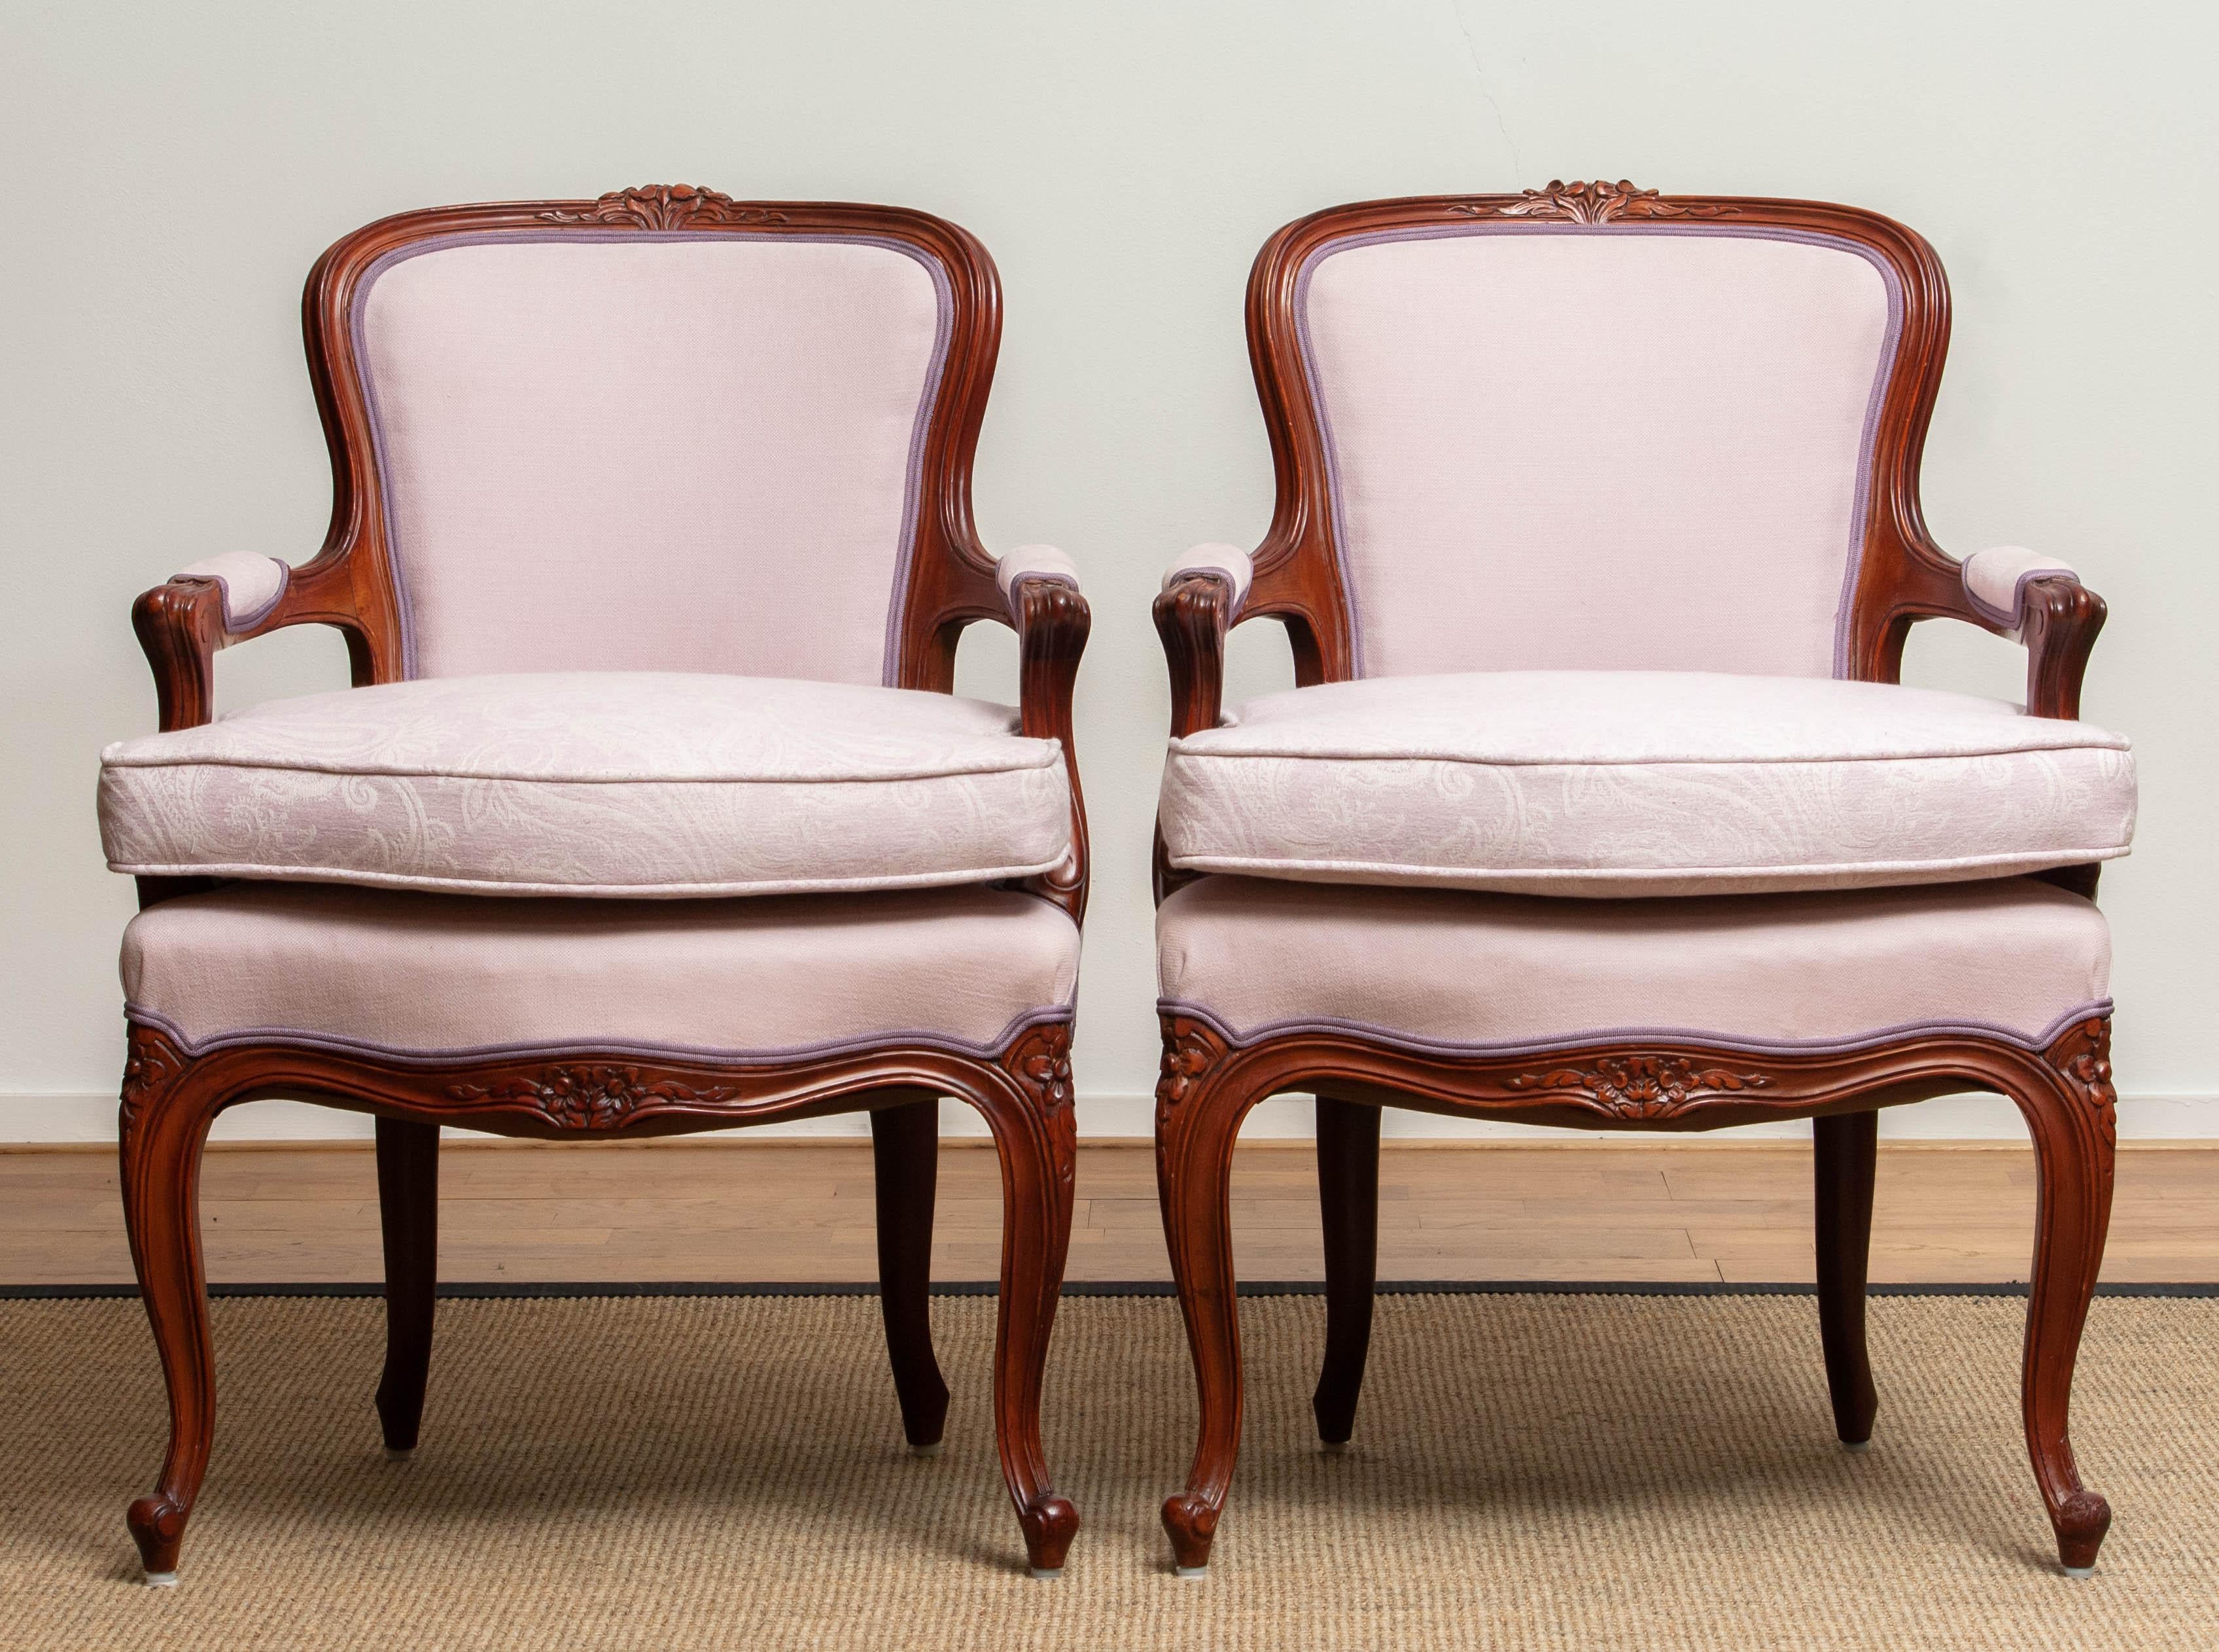 1950s, the Swedish Neo-Rococo, and finished in the shabby chic technique armchair is in perfect condition. Upholstered in pink fabric and an extra cushion for extra comfort also in pink jacquard. Measures: Seat height with the extra cushion is: